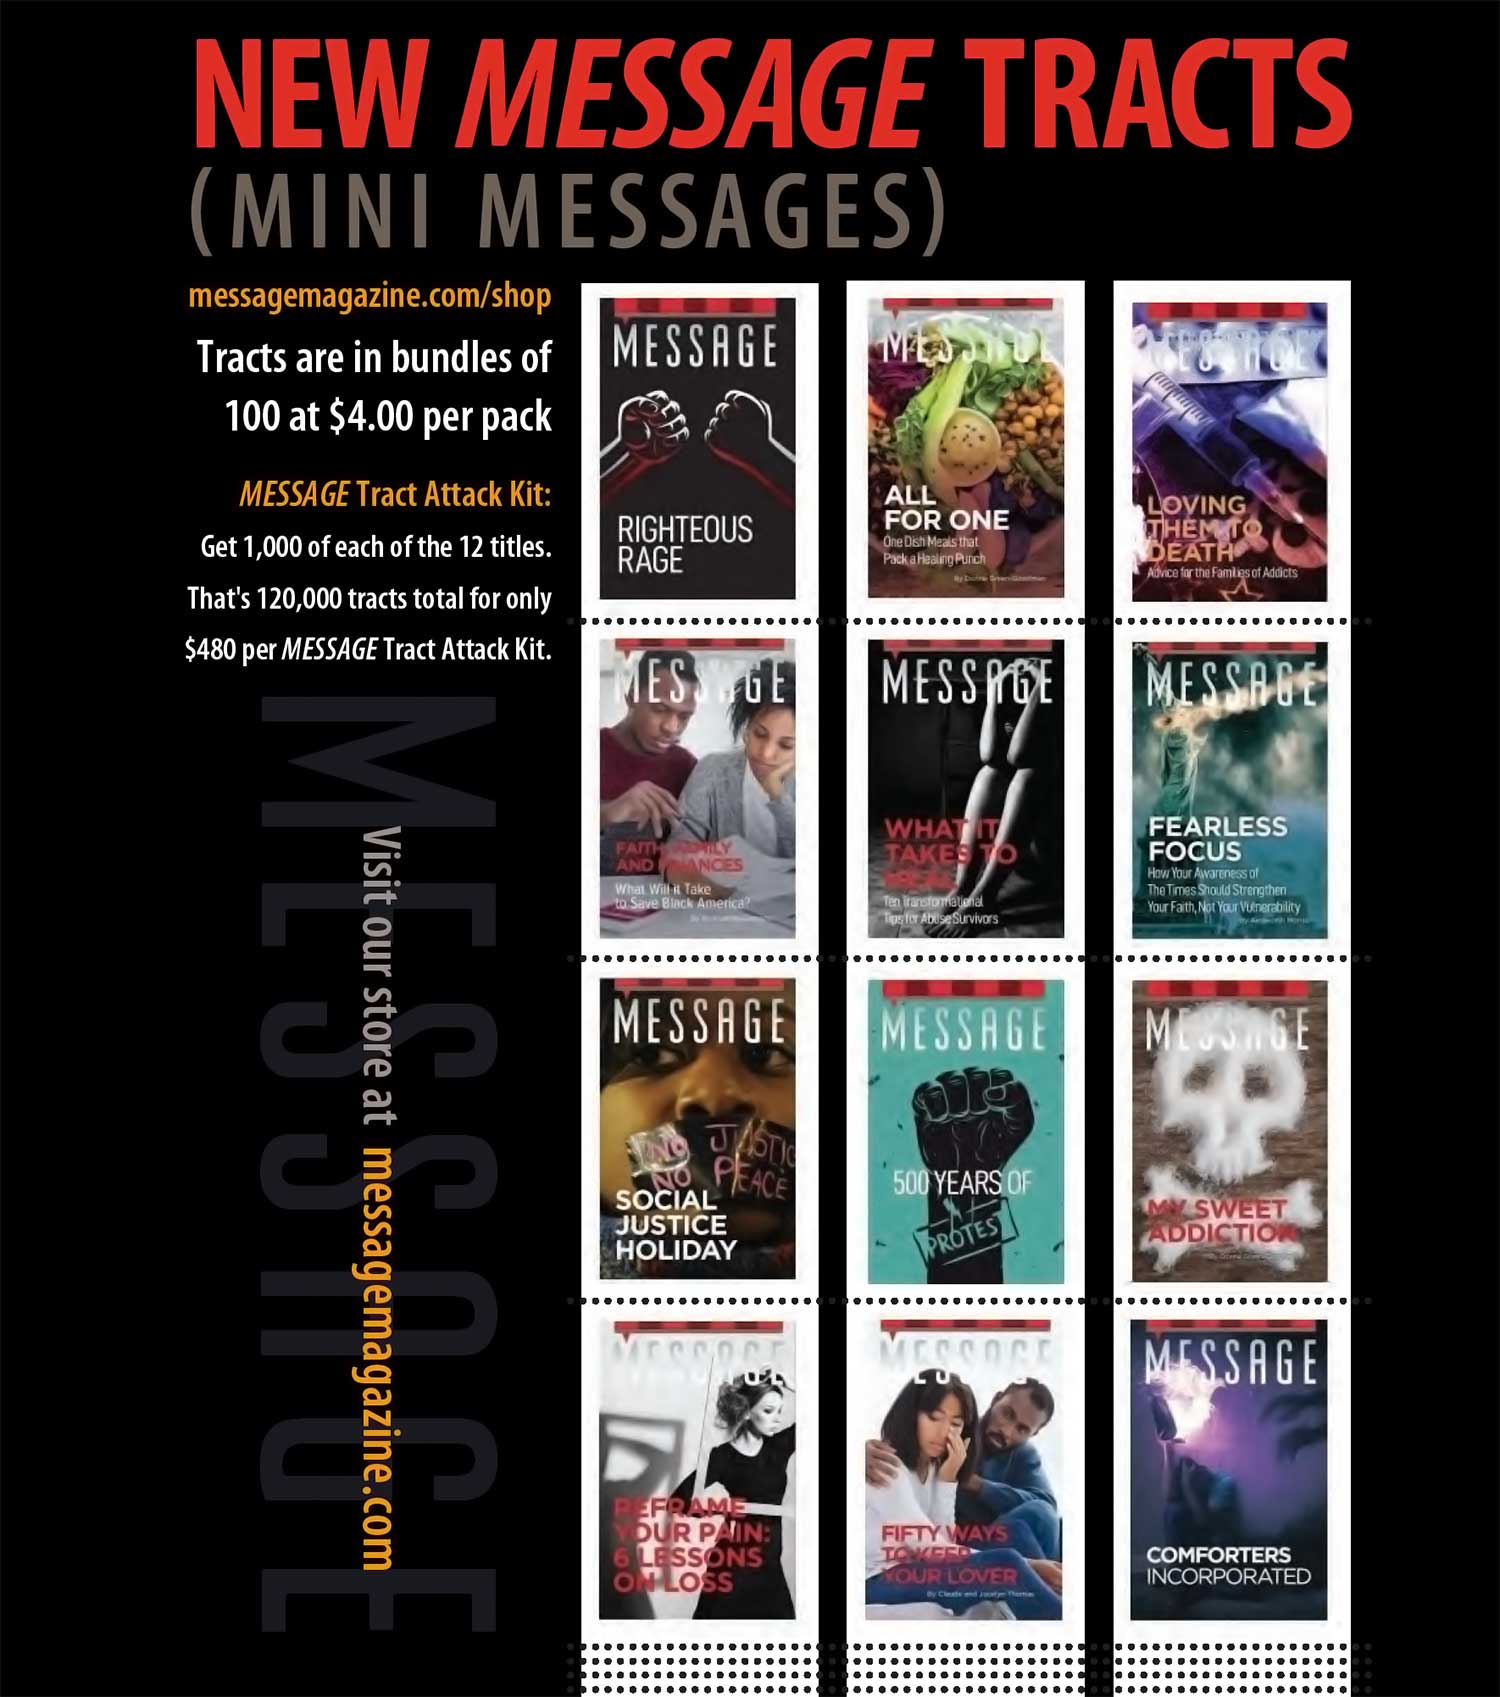 Message Magazine New Message Tracts Advertisement